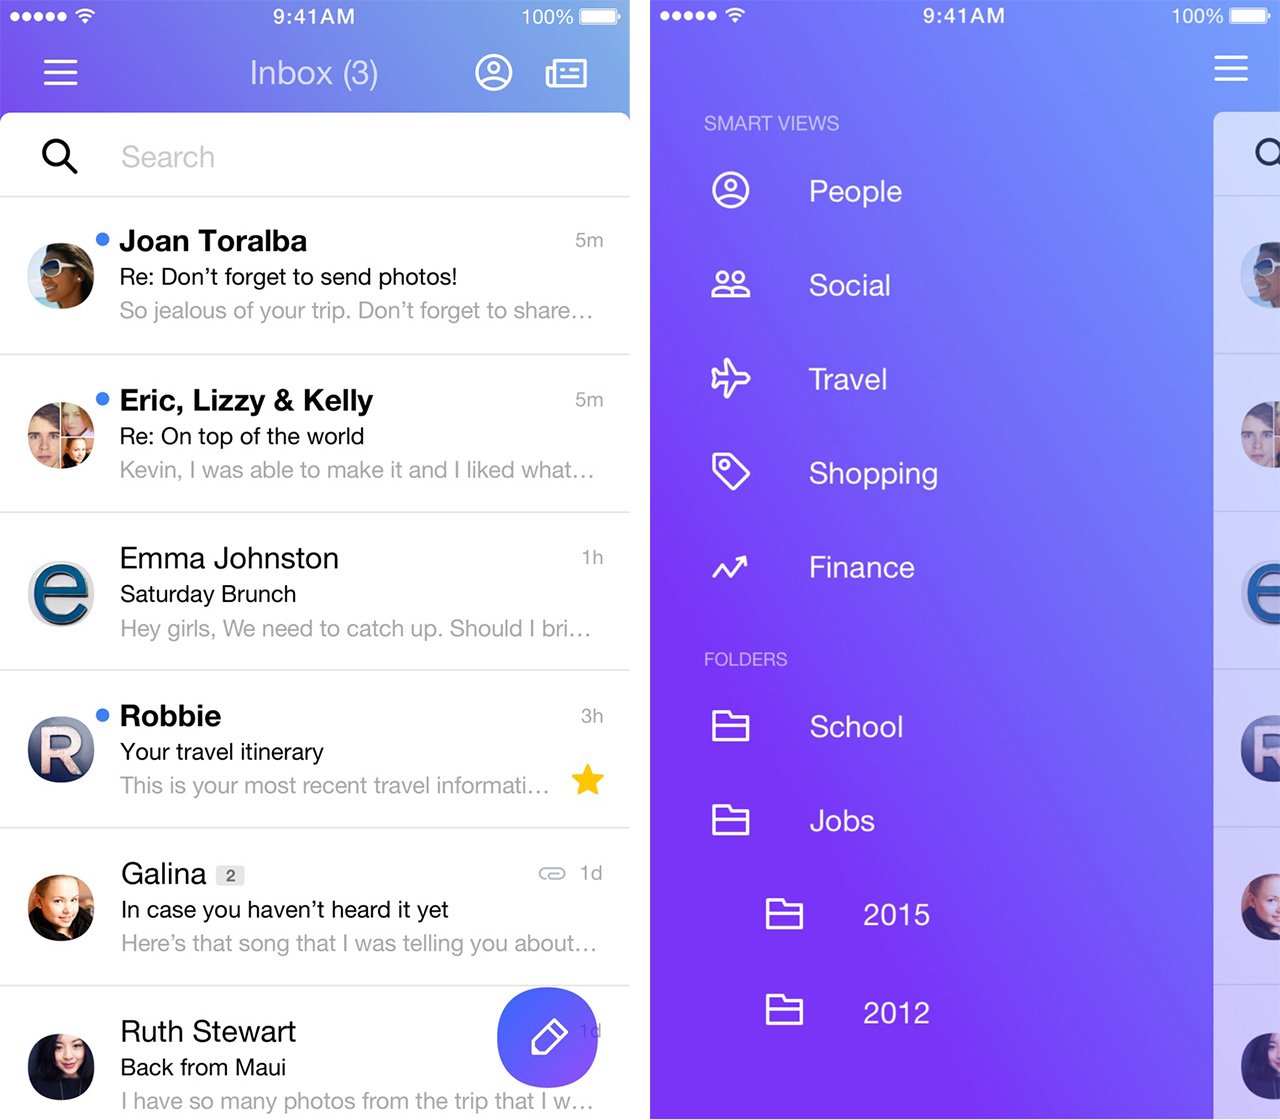 Download the yahoo mail app for ios and android devices iphone